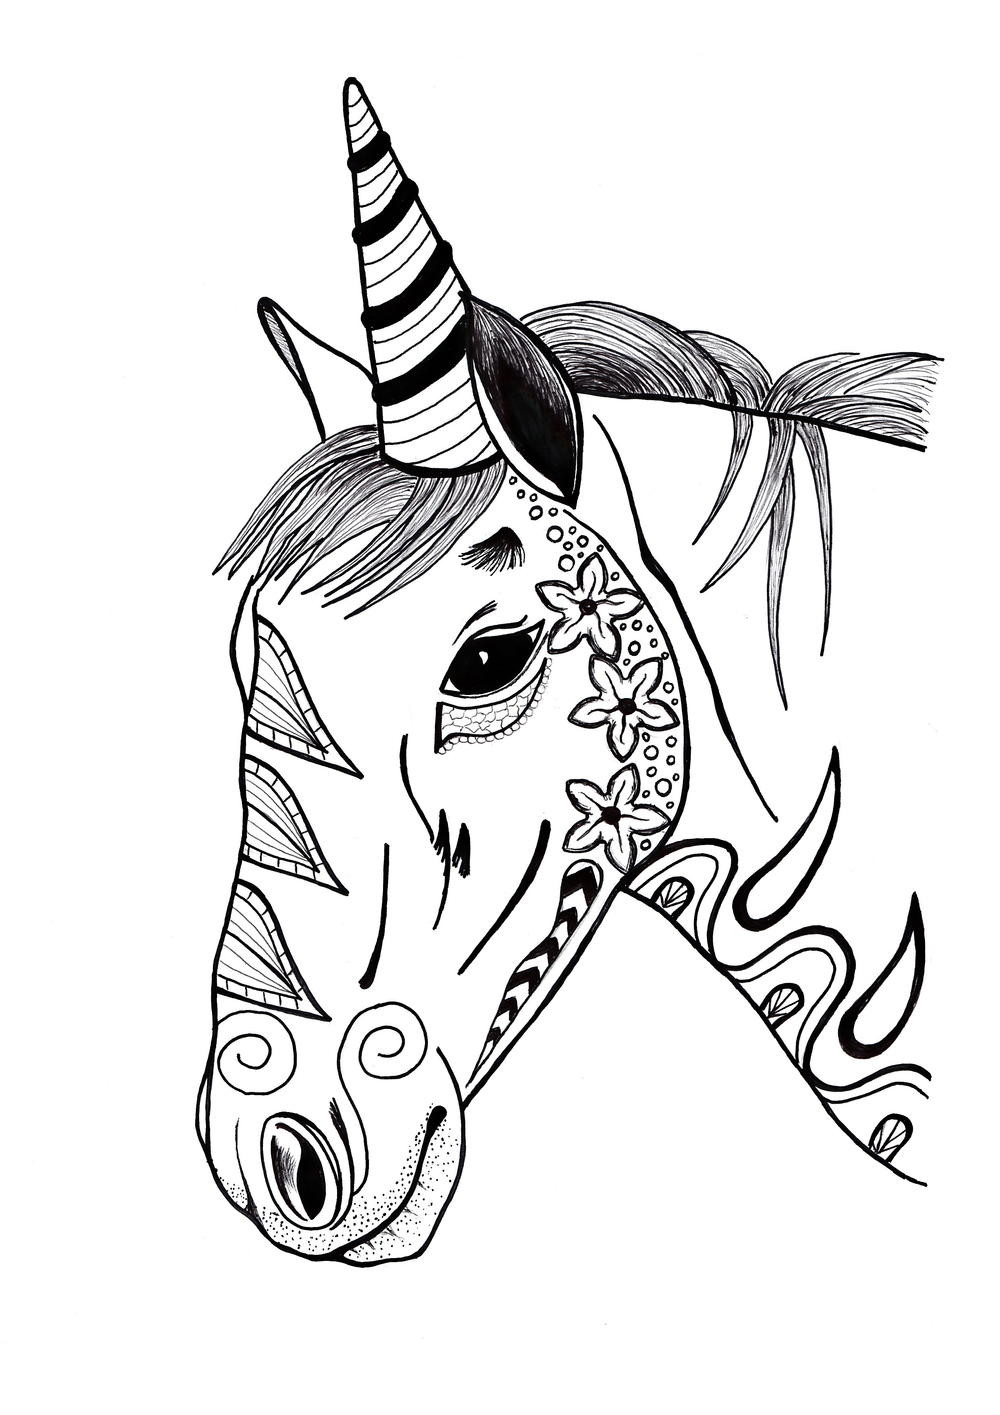 Unicorn Coloring Pages For Adults
 Colorful Unicorn Adult Coloring Page